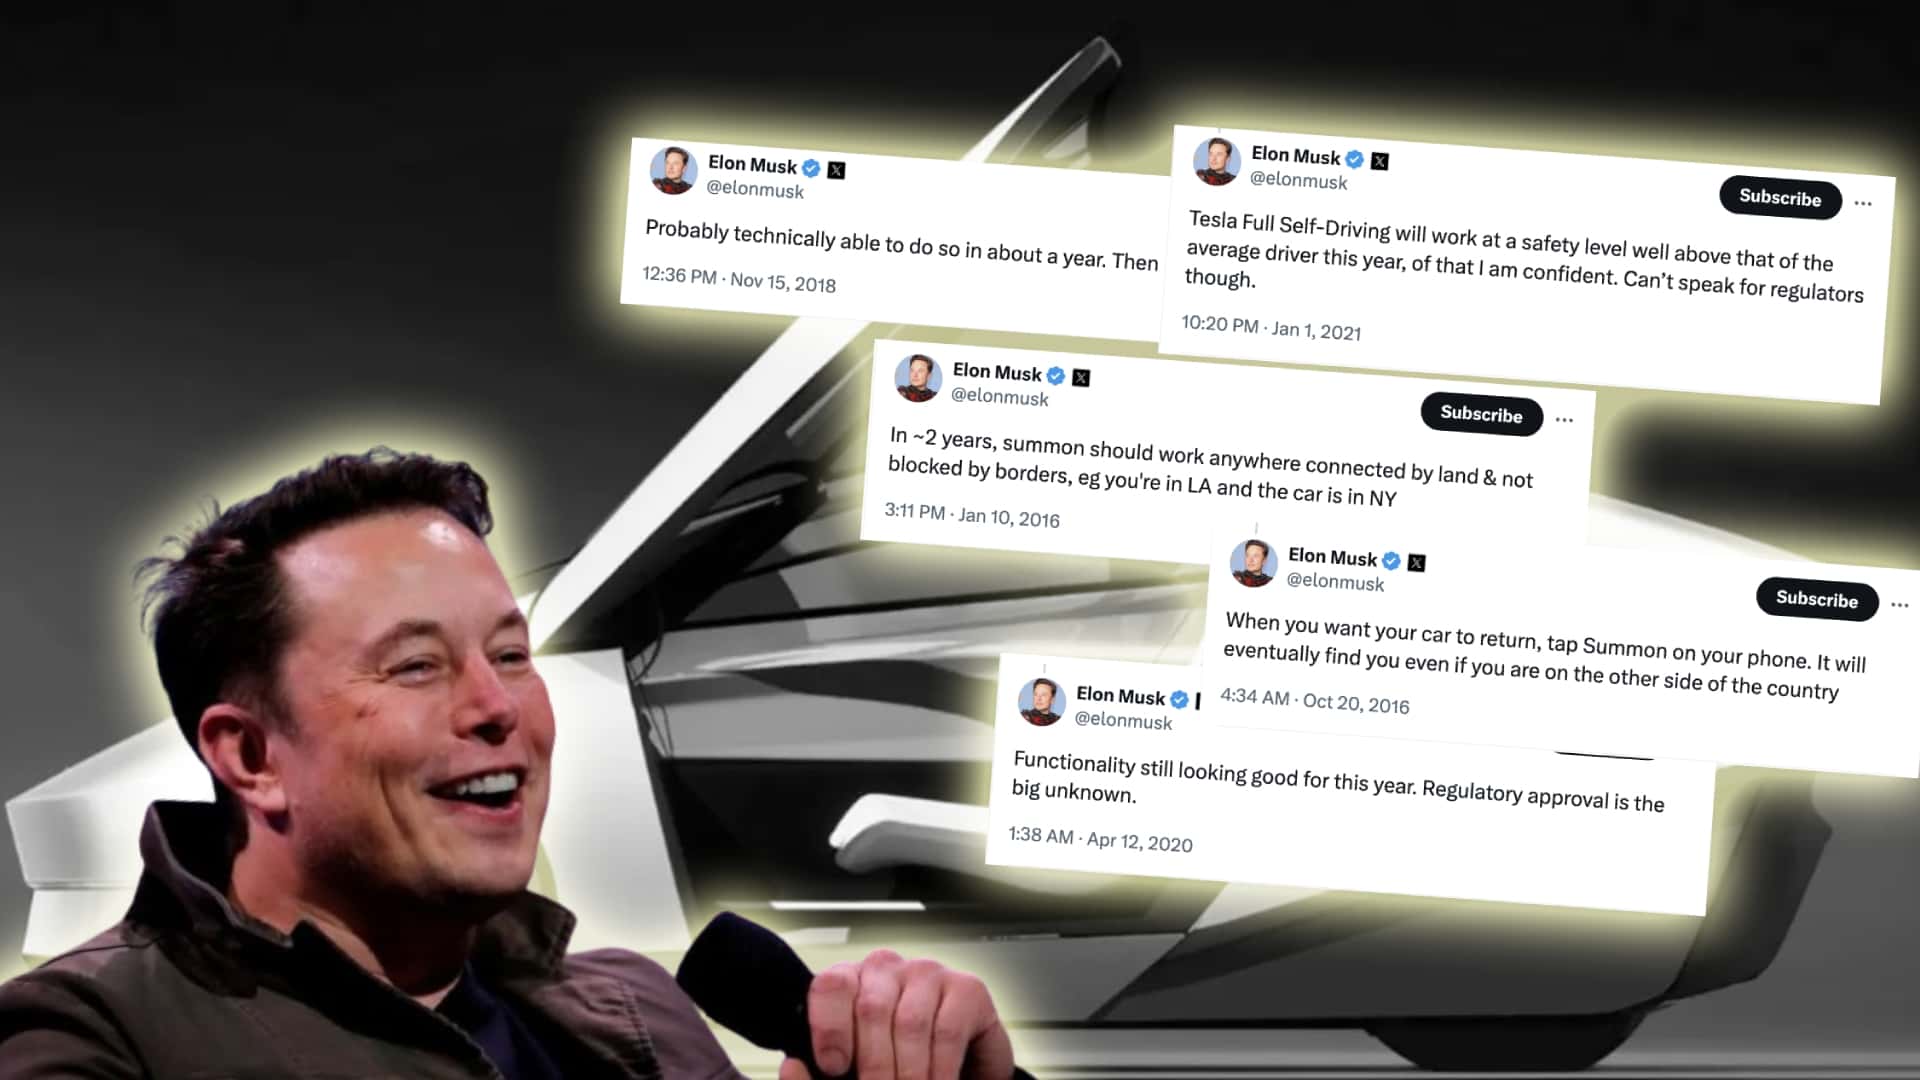 elon musk's self-driving promises are getting old